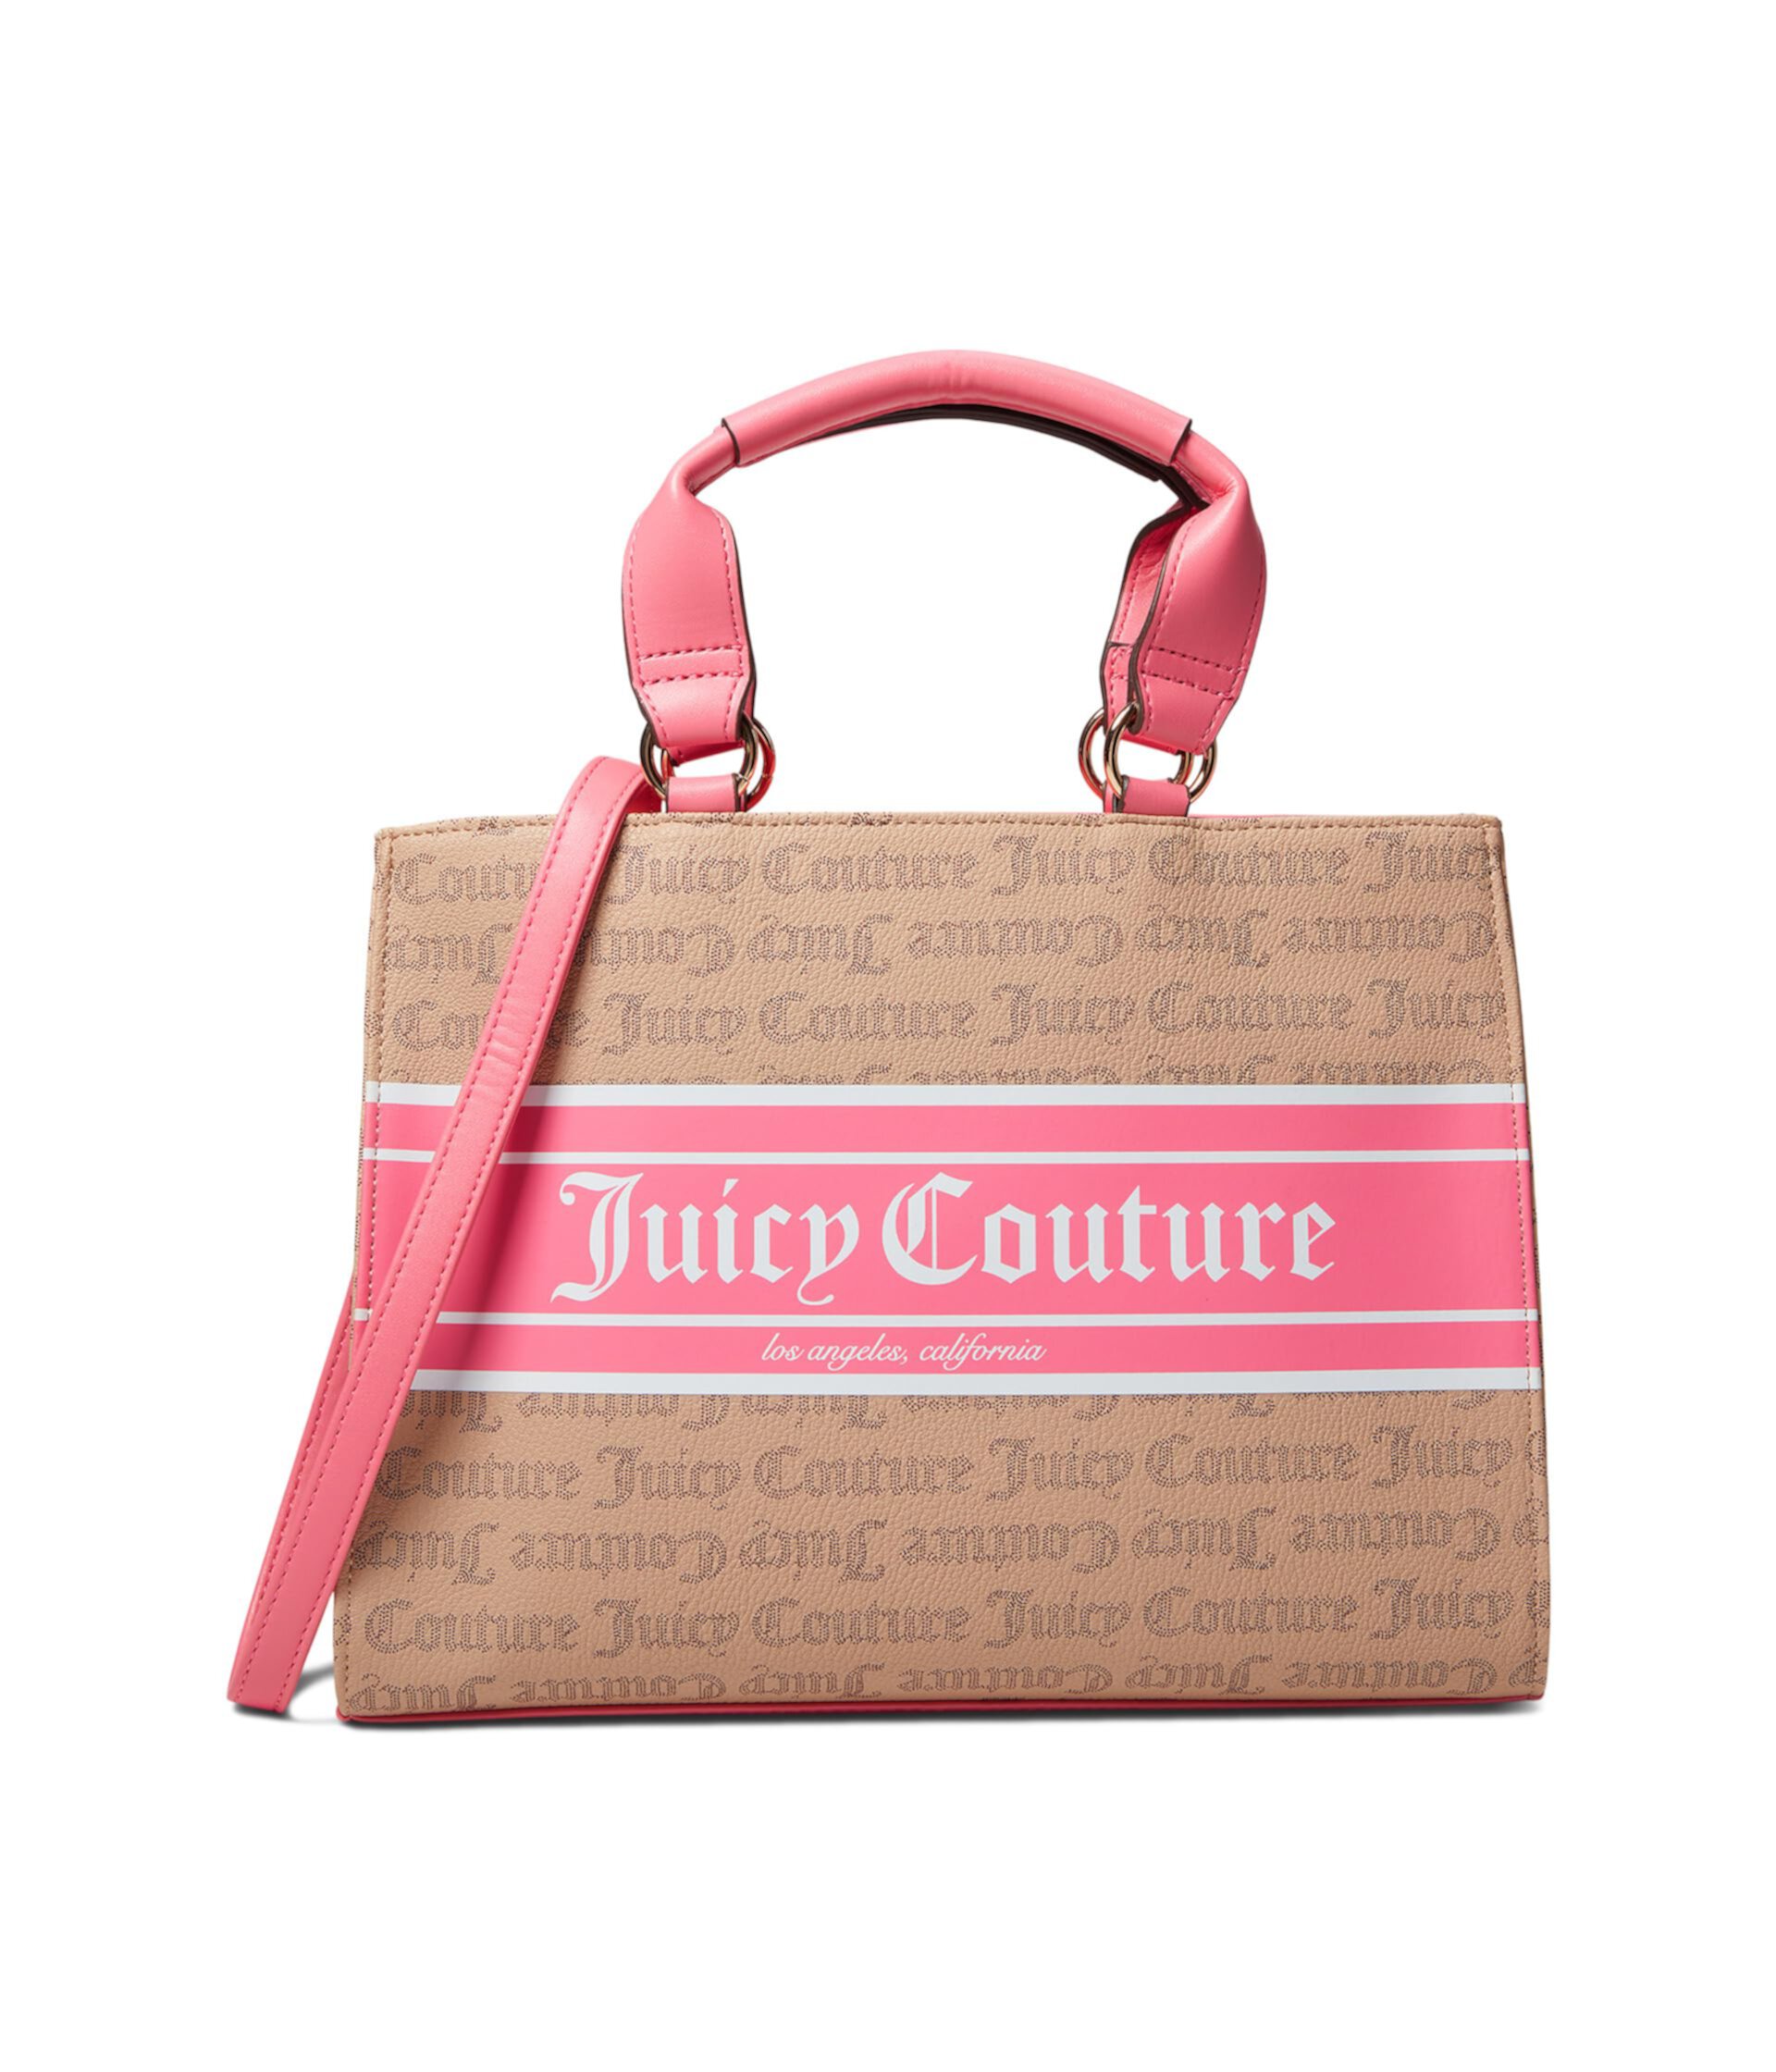 Женская Парадная Сумка Juicy Couture Juicy Couture